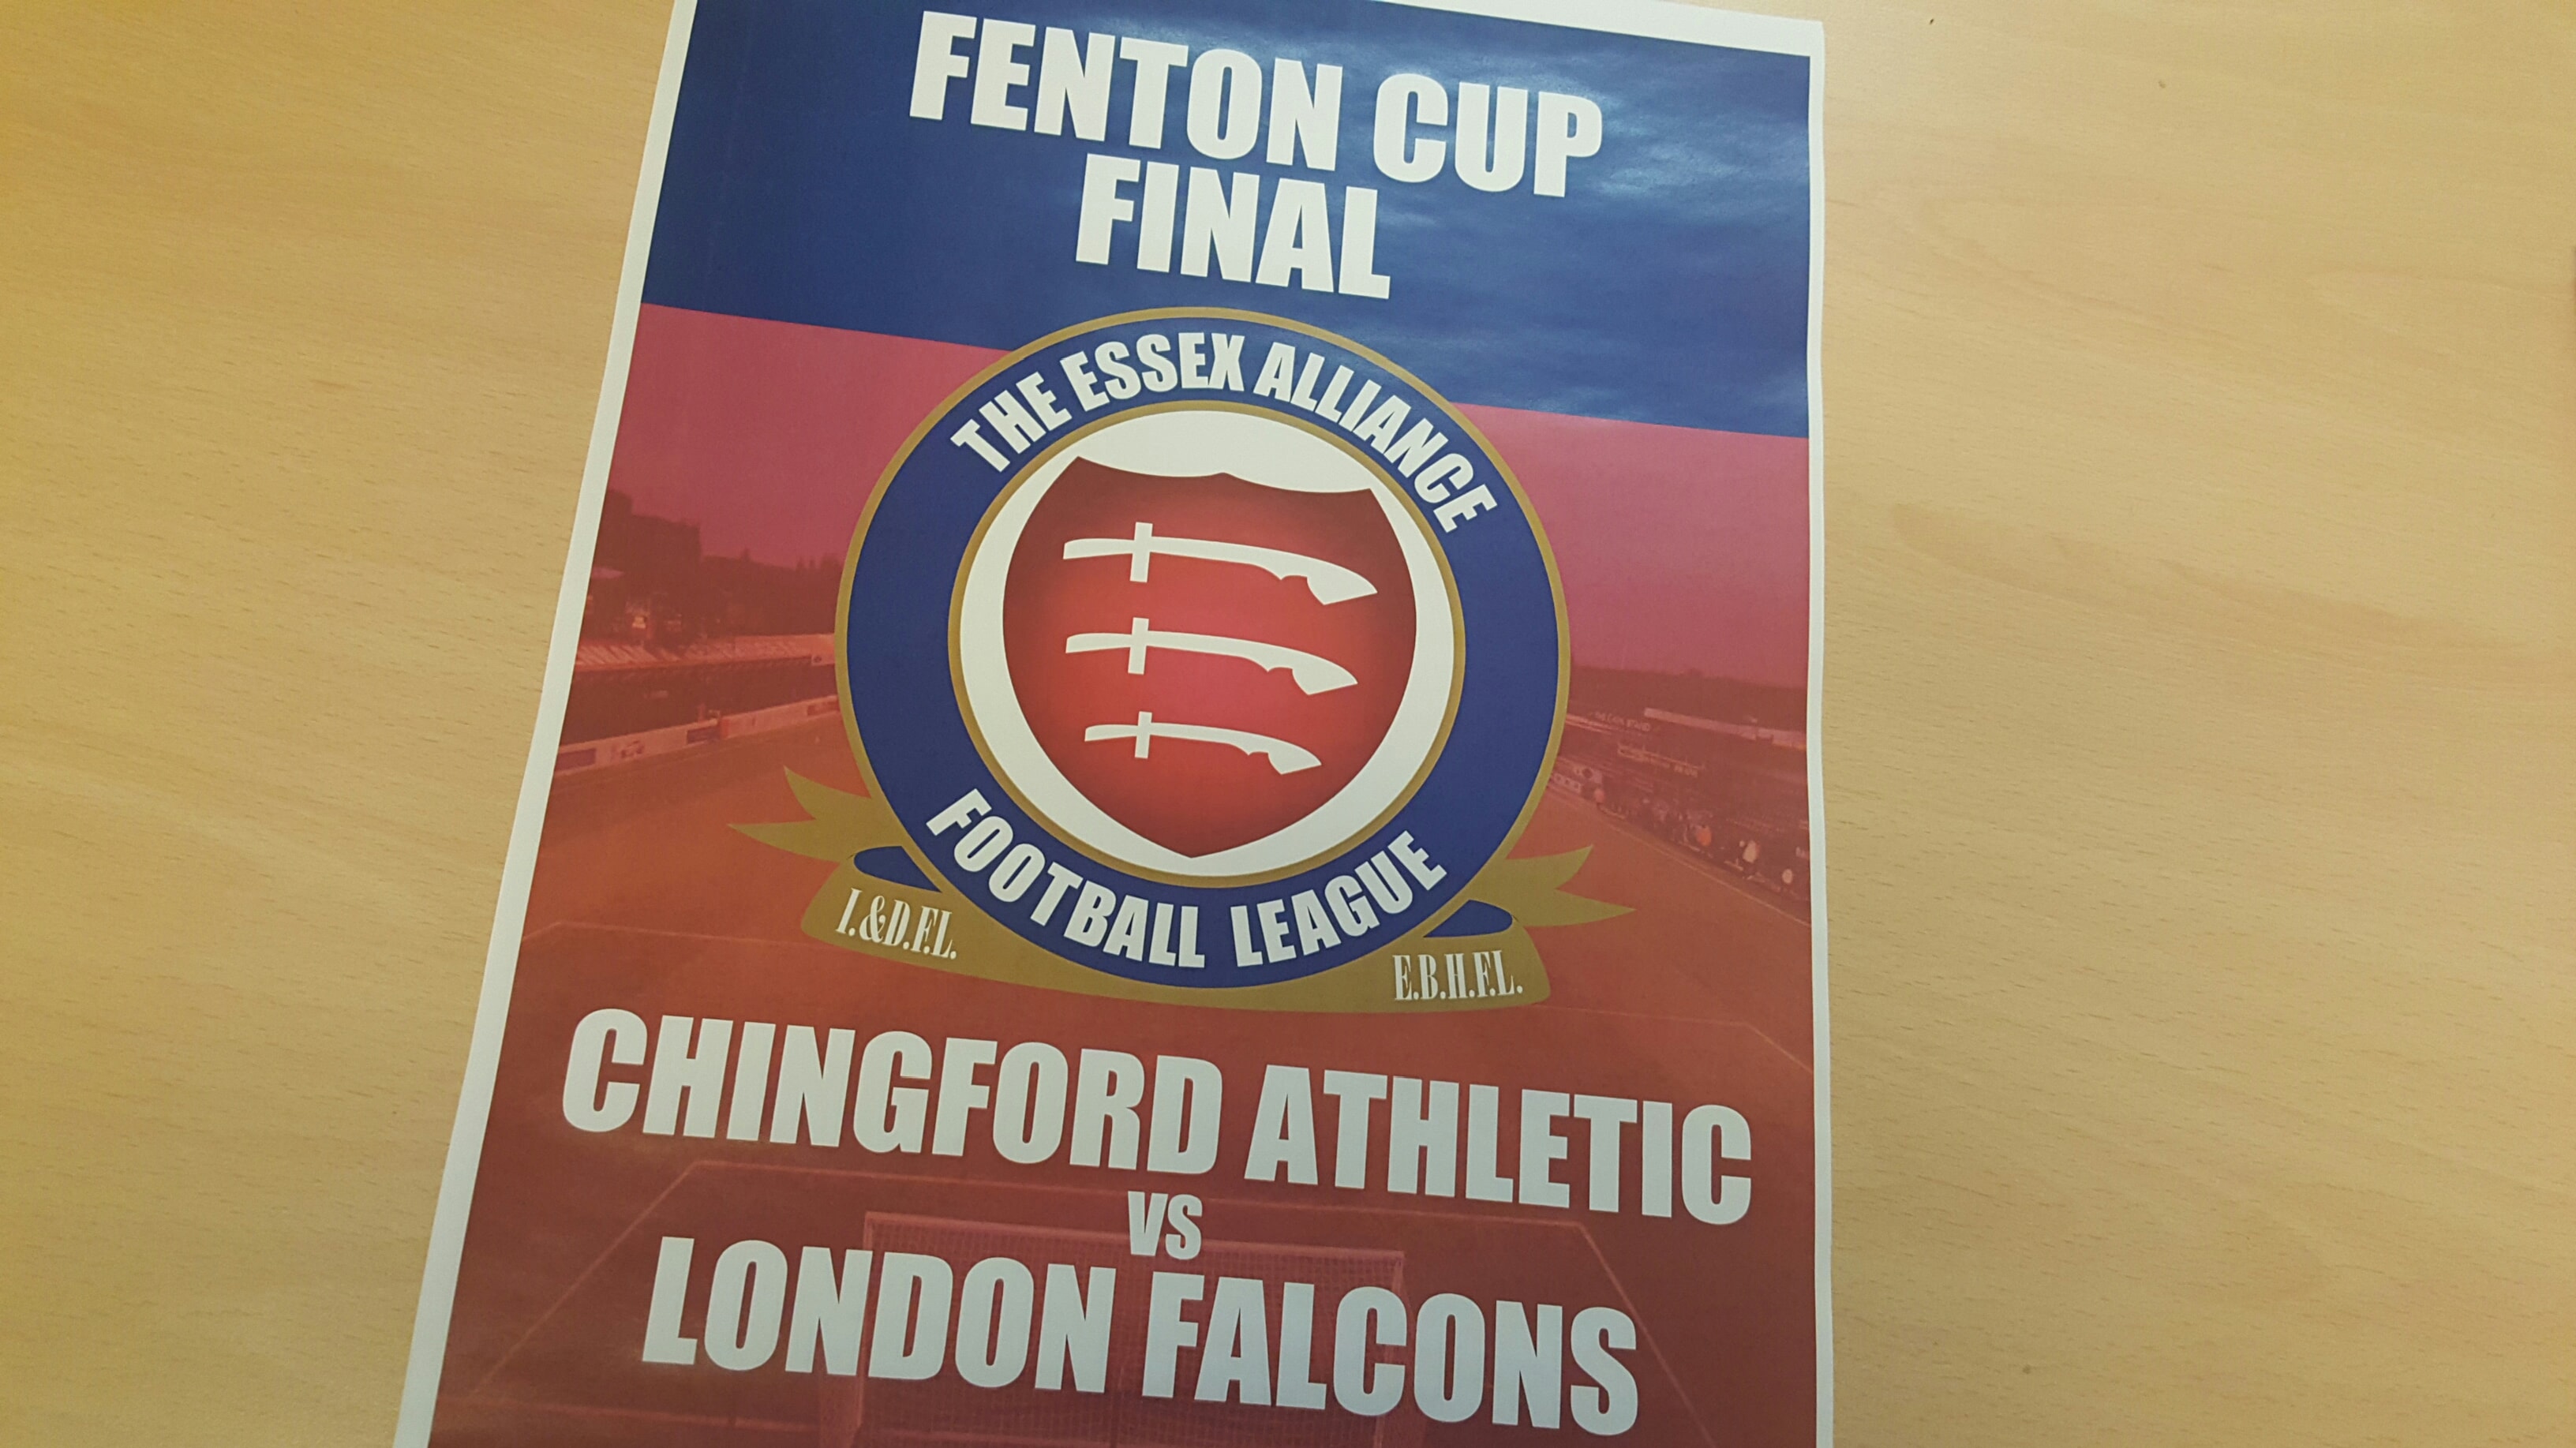 CUP FINAL PREVIEW: Chingford Athletic face London Falcons in Fenton Cup showdown